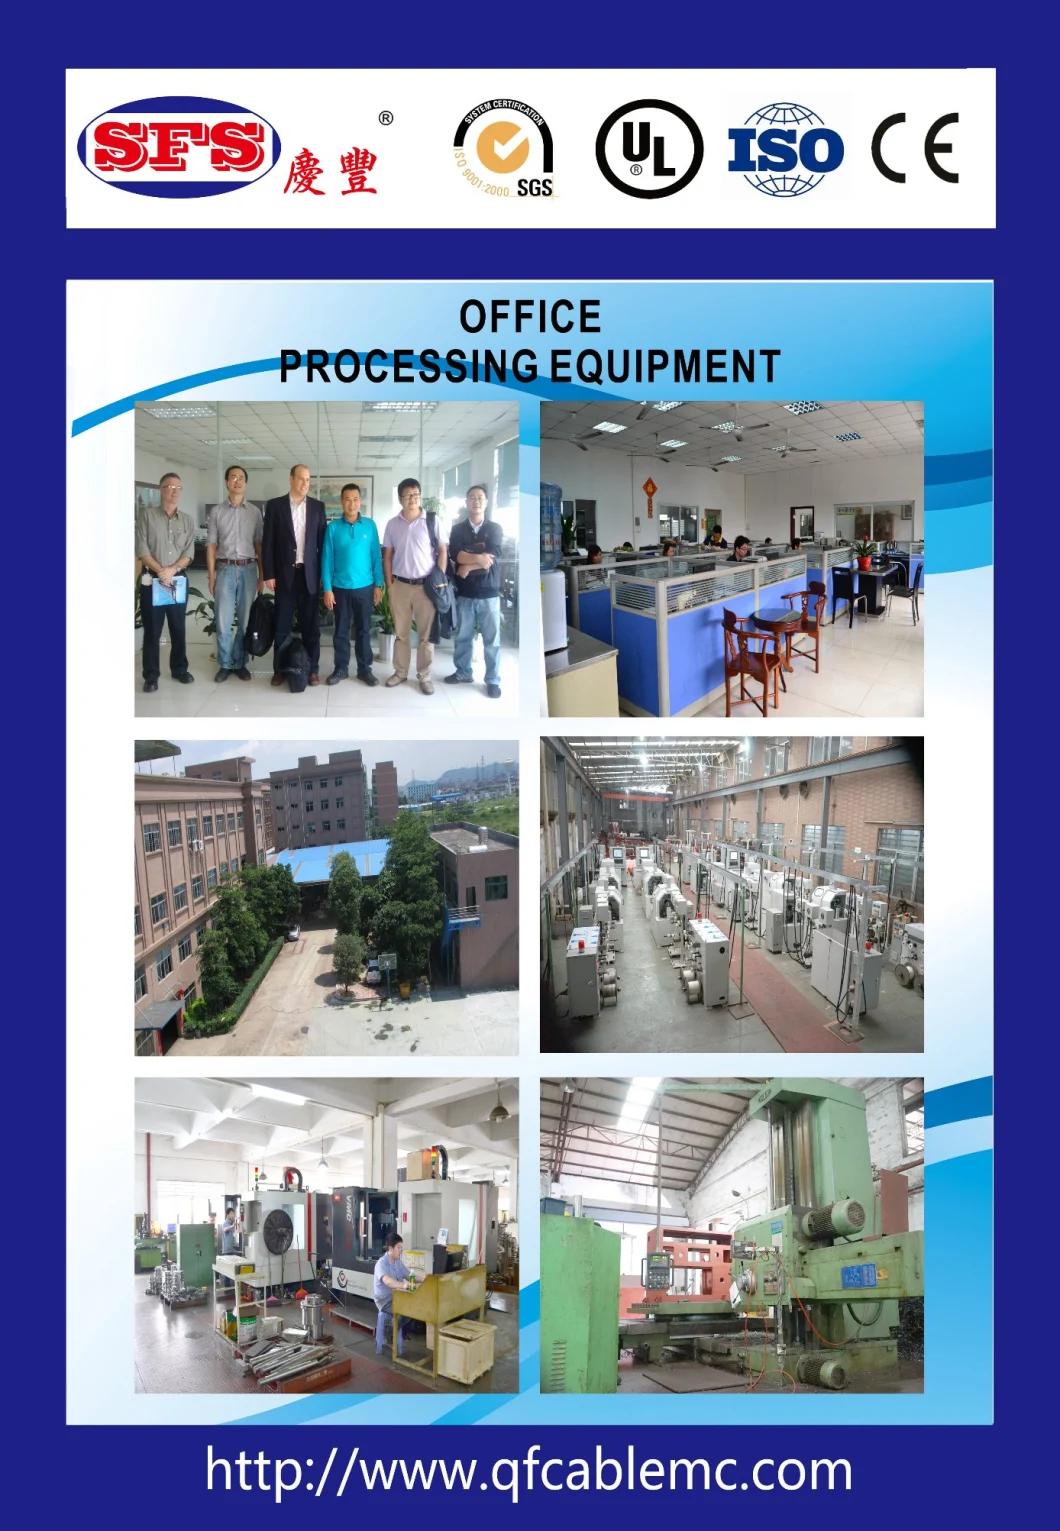 Electronic Wire, Core Wire and Power Wire Insulation Extrusion Production Line (QF-70)